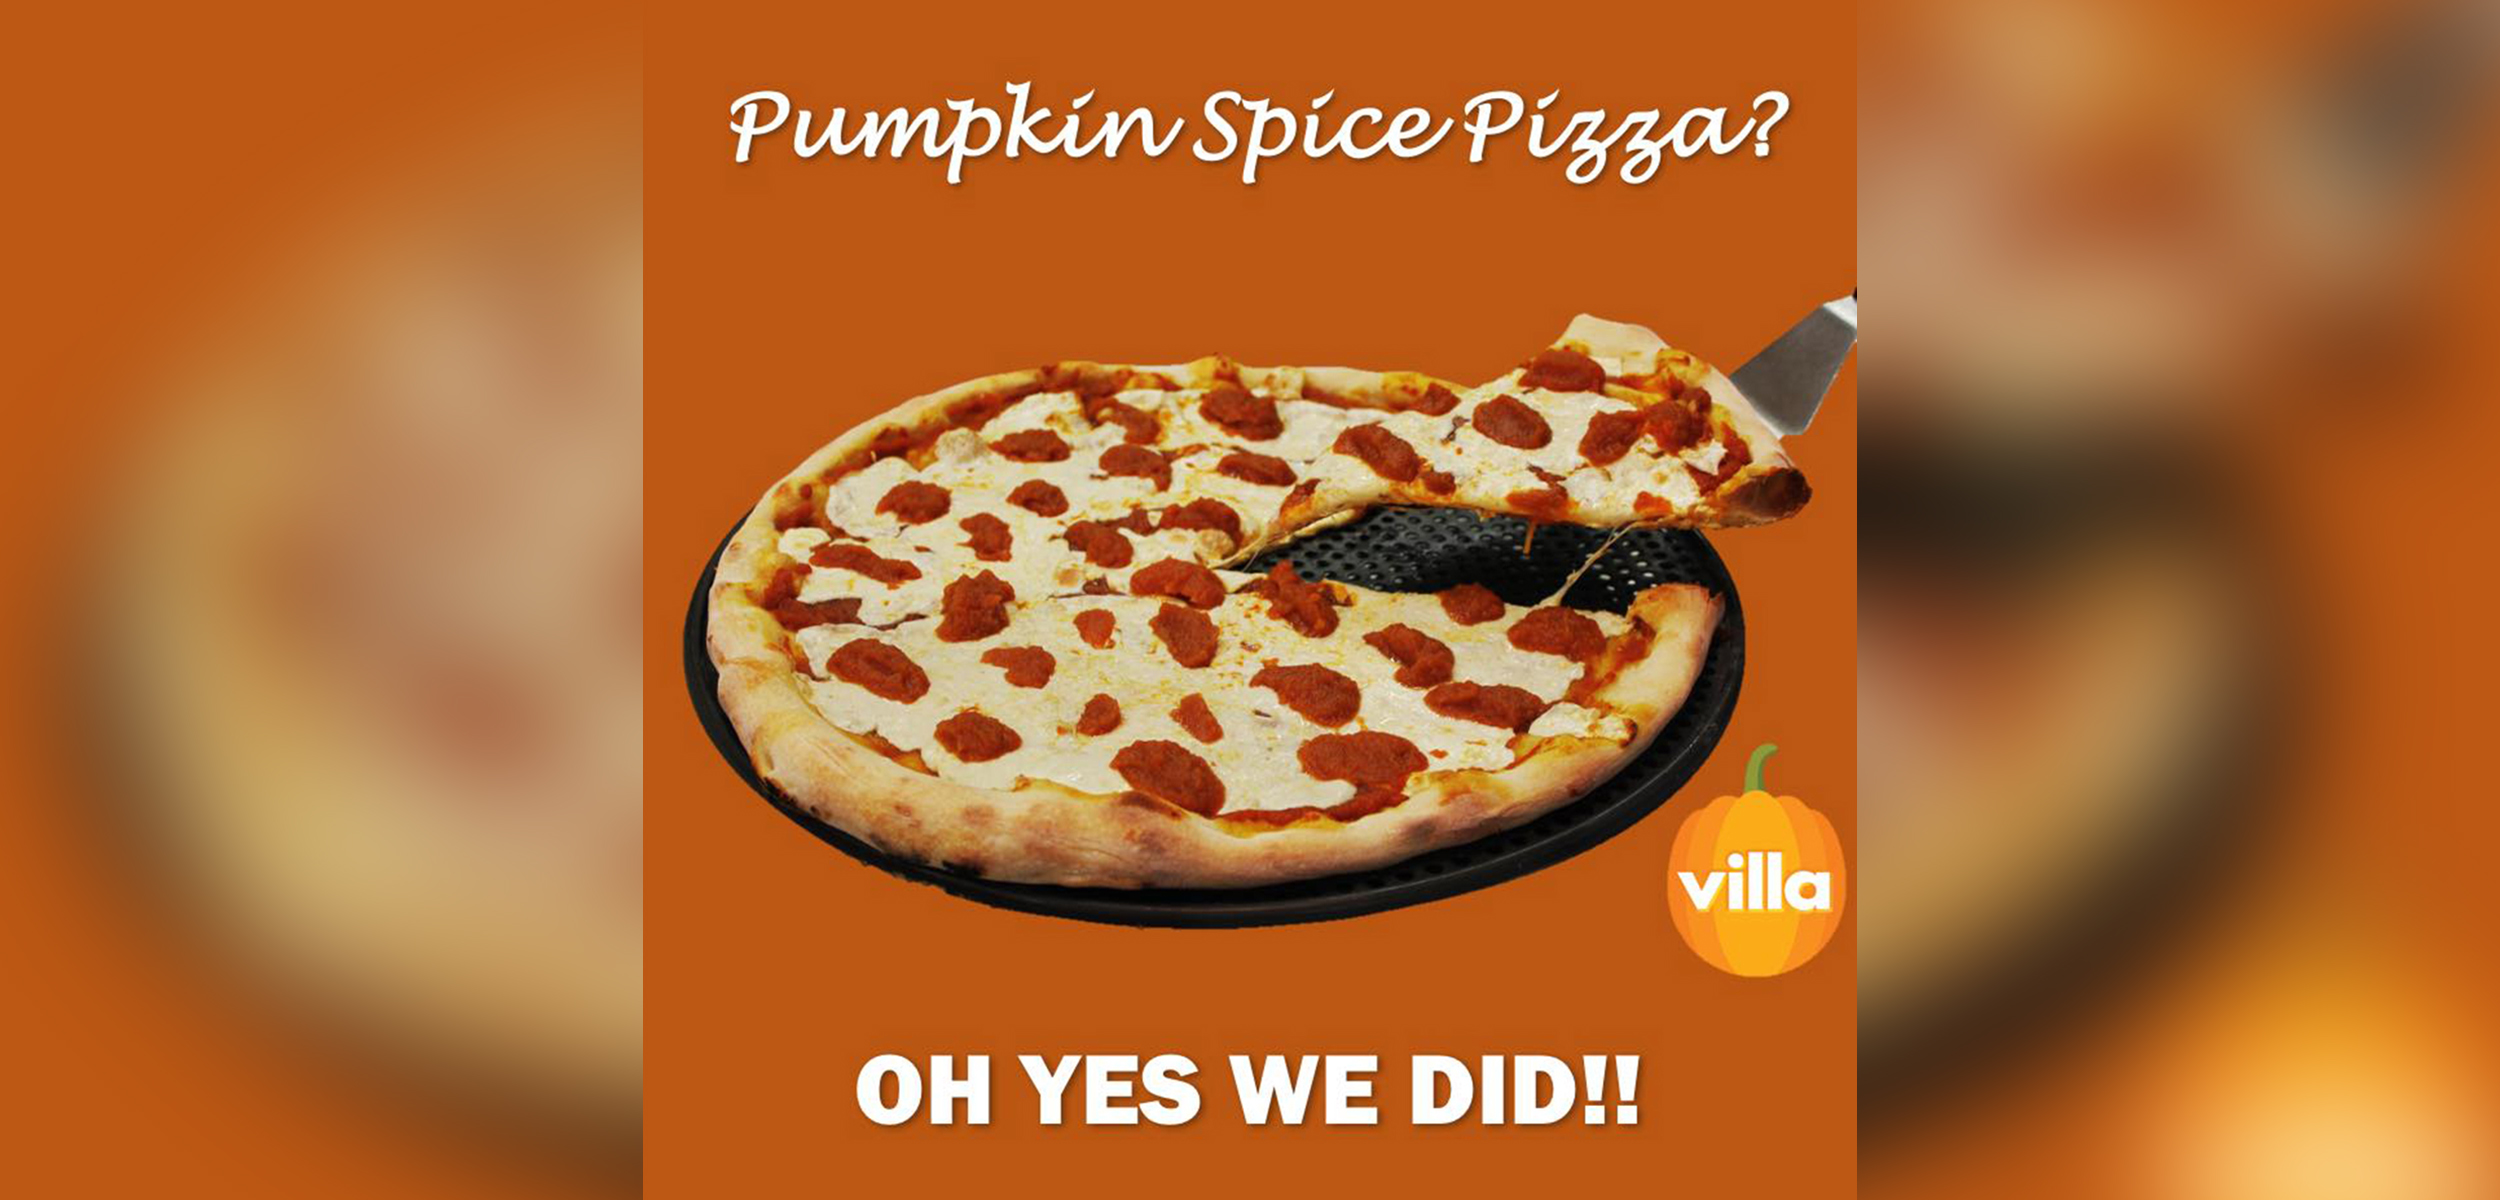 PHOTO: The restaurant group Villa Italian Kitchen has unveiled a new "Pumpkin Spice Pizza" this fall.